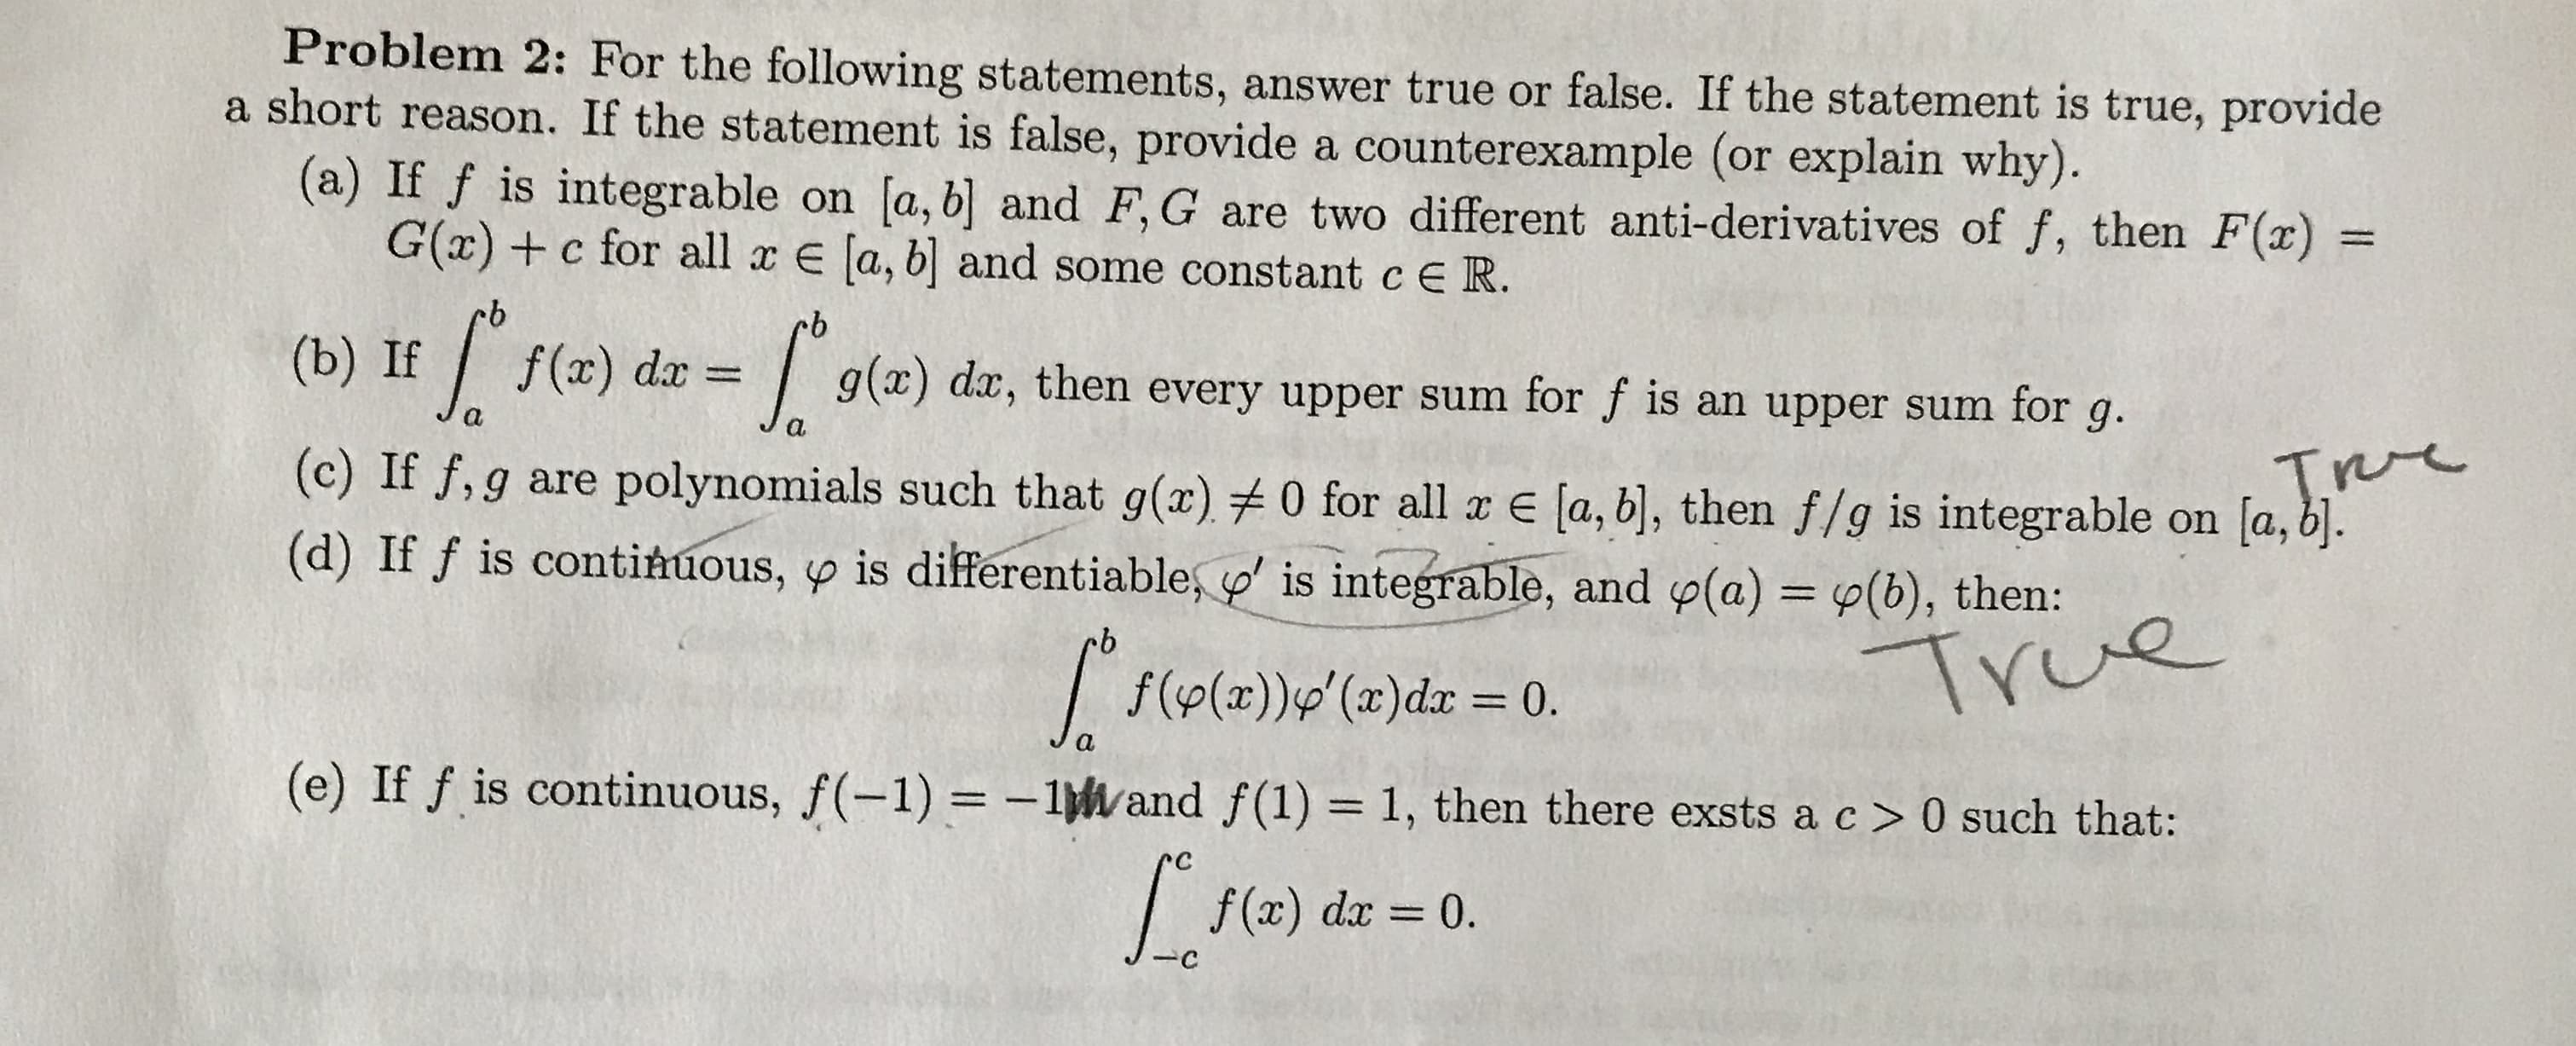 Problem 2: For the following statements, answer true or false. If the statement is true, provide
a short reason. If the statement is false, provide a counterexample (or explain why).
(a) If f is integrable on [a, b] and F,G are two different anti-derivatives of f, then F(x) =
G(x) +c for all x E [a, b and some constant c E R.
%3D
(b) If
9.
g(x) dx, then every upper sum for f is an upper sum for g.
f(x) dr = |
(c) If f, g are polynomials such that g(x) 0 for all x E (a, b], then f/g is integrable on [a, b].
(d) If f is continuous, y is differentiable, y' is integrable, and y(a) = y(b), then:
%3D
True
| f(p(x))g'(x)dx = 0.
xp(x),6((x)d)f
(e) If f is continuous, f(-1) = -1Wand f(1) = 1, then there exsts a c> 0 such that:
%3D
rc
f (x) dx =
0.
%3D
